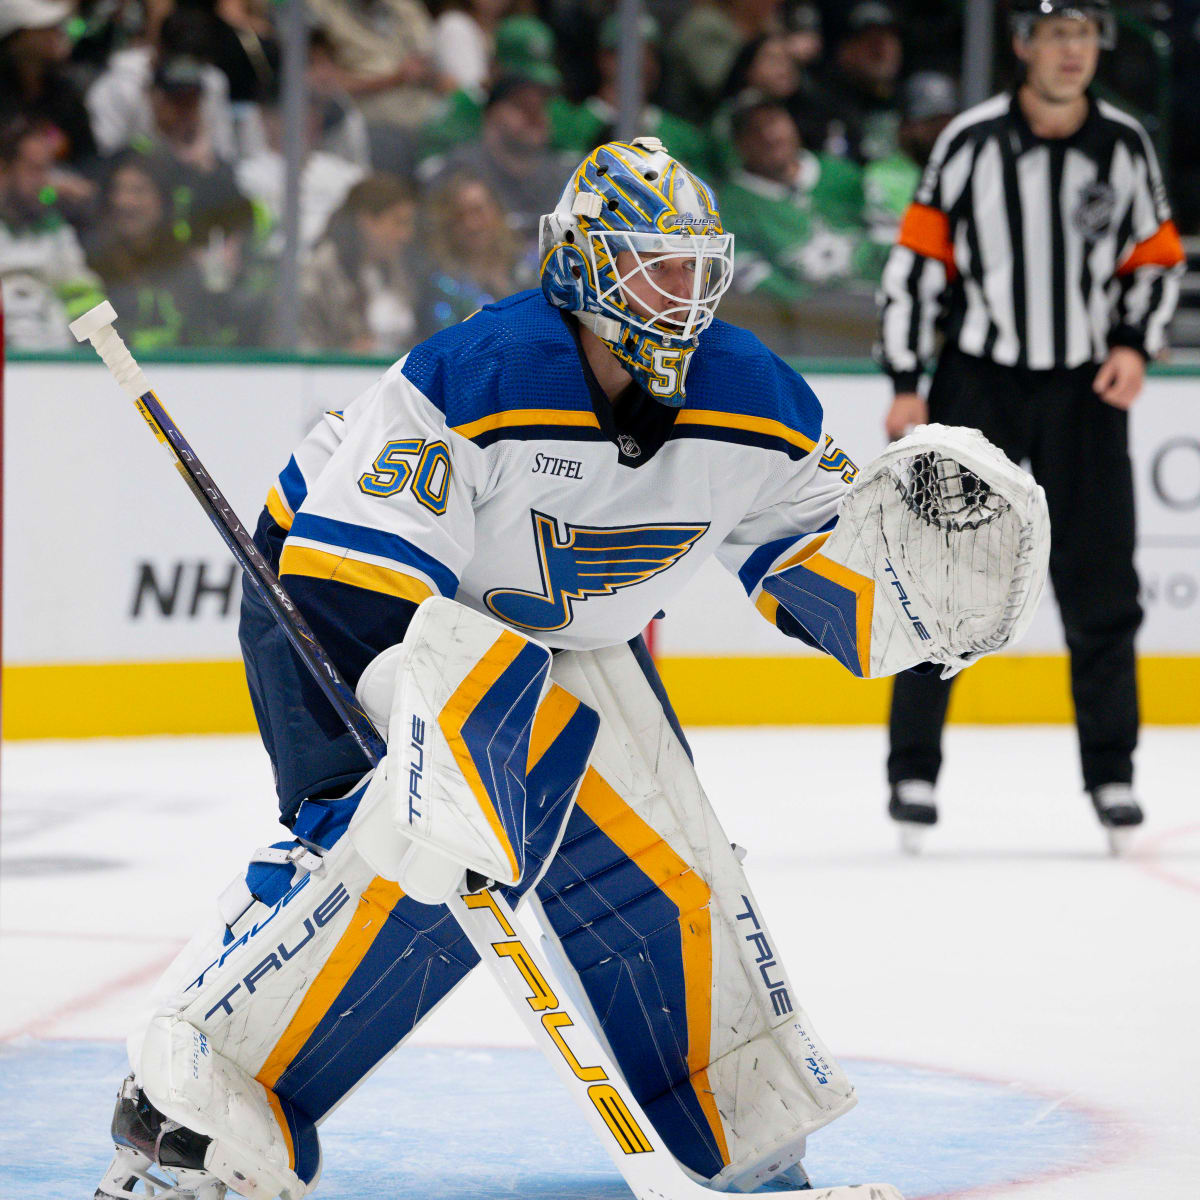 Binnington chased early, Blues fall to Penguins 6-2 Midwest News